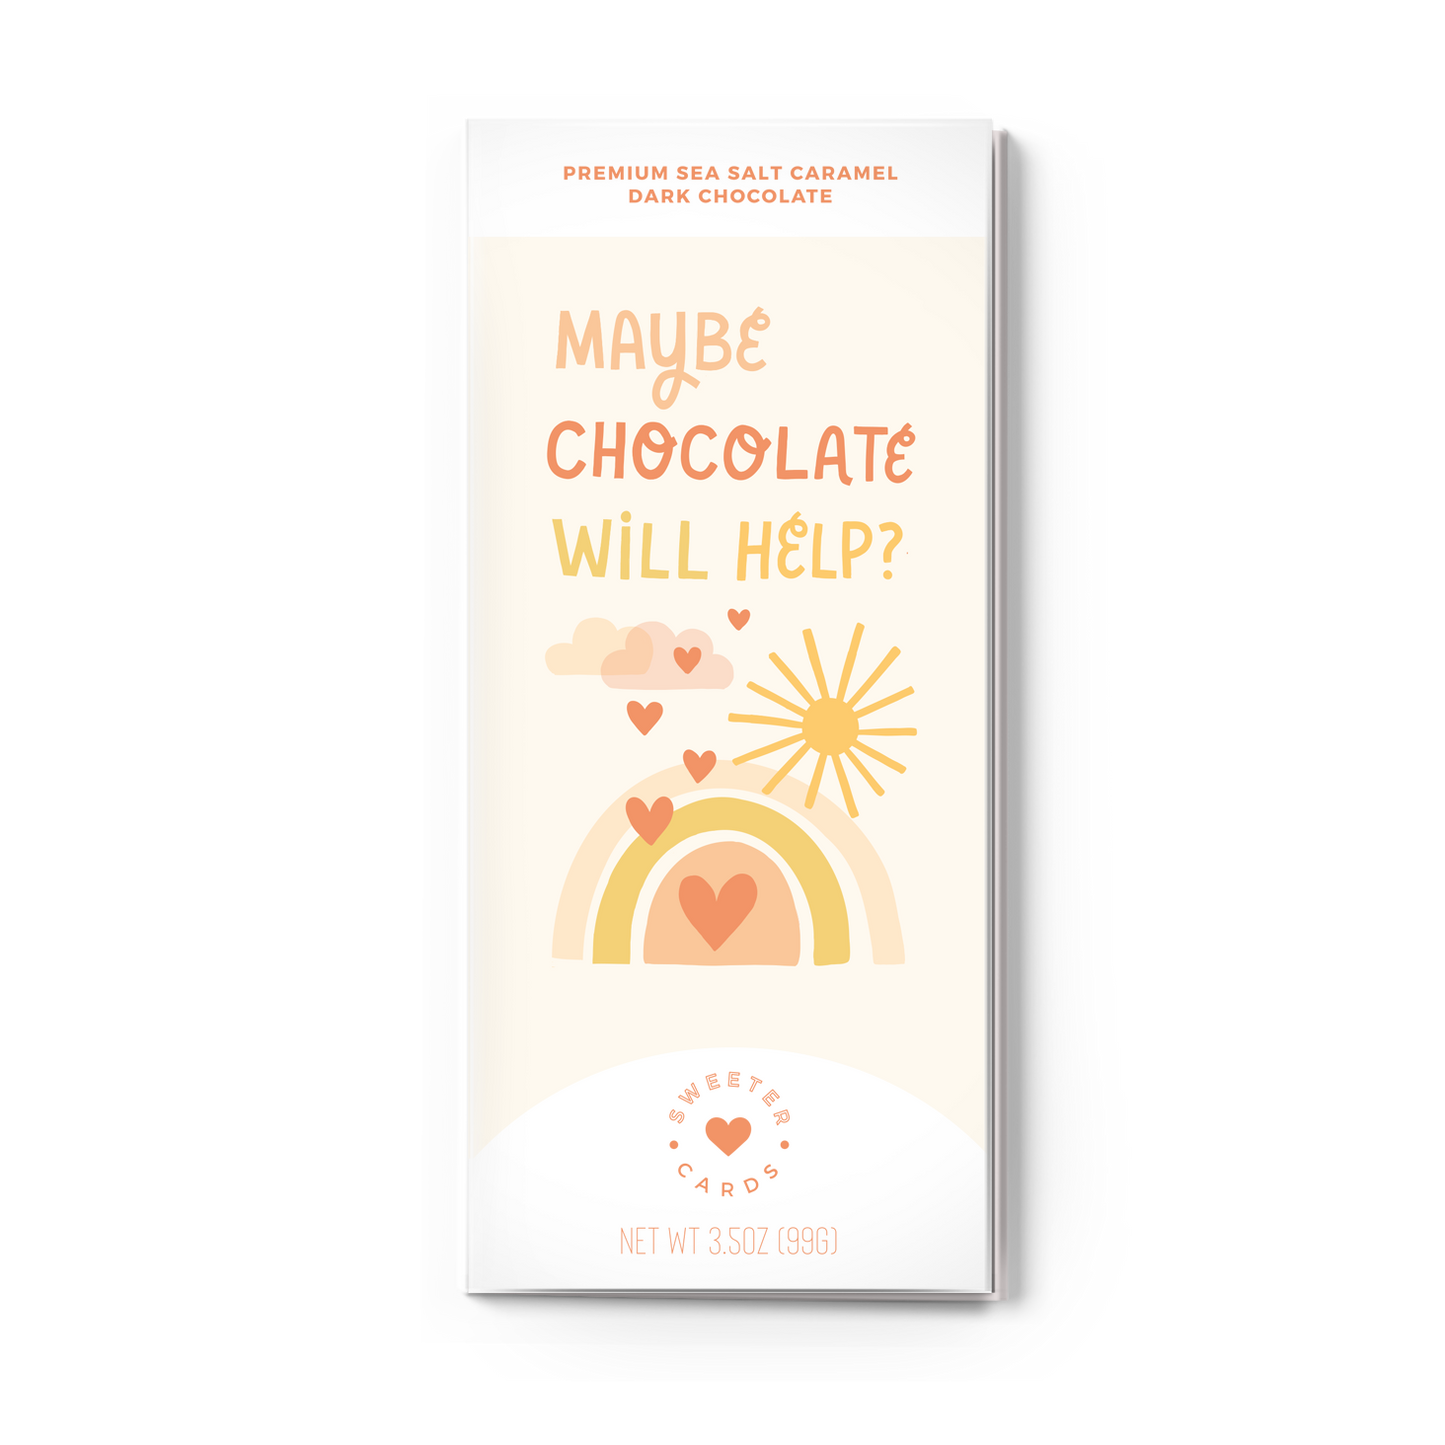 Sweeter Card - Chocolate Bar + Greeting Card in ONE! - Maybe Chocolate Will Help? for "Thinking of You," Grief, Get Well Soon, + other scenarios where a loved one may be struggling  Sweeter Cards Chocolate Bar + Greeting Card in ONE!   -better made easy-eco-friendly-sustainable-gifting